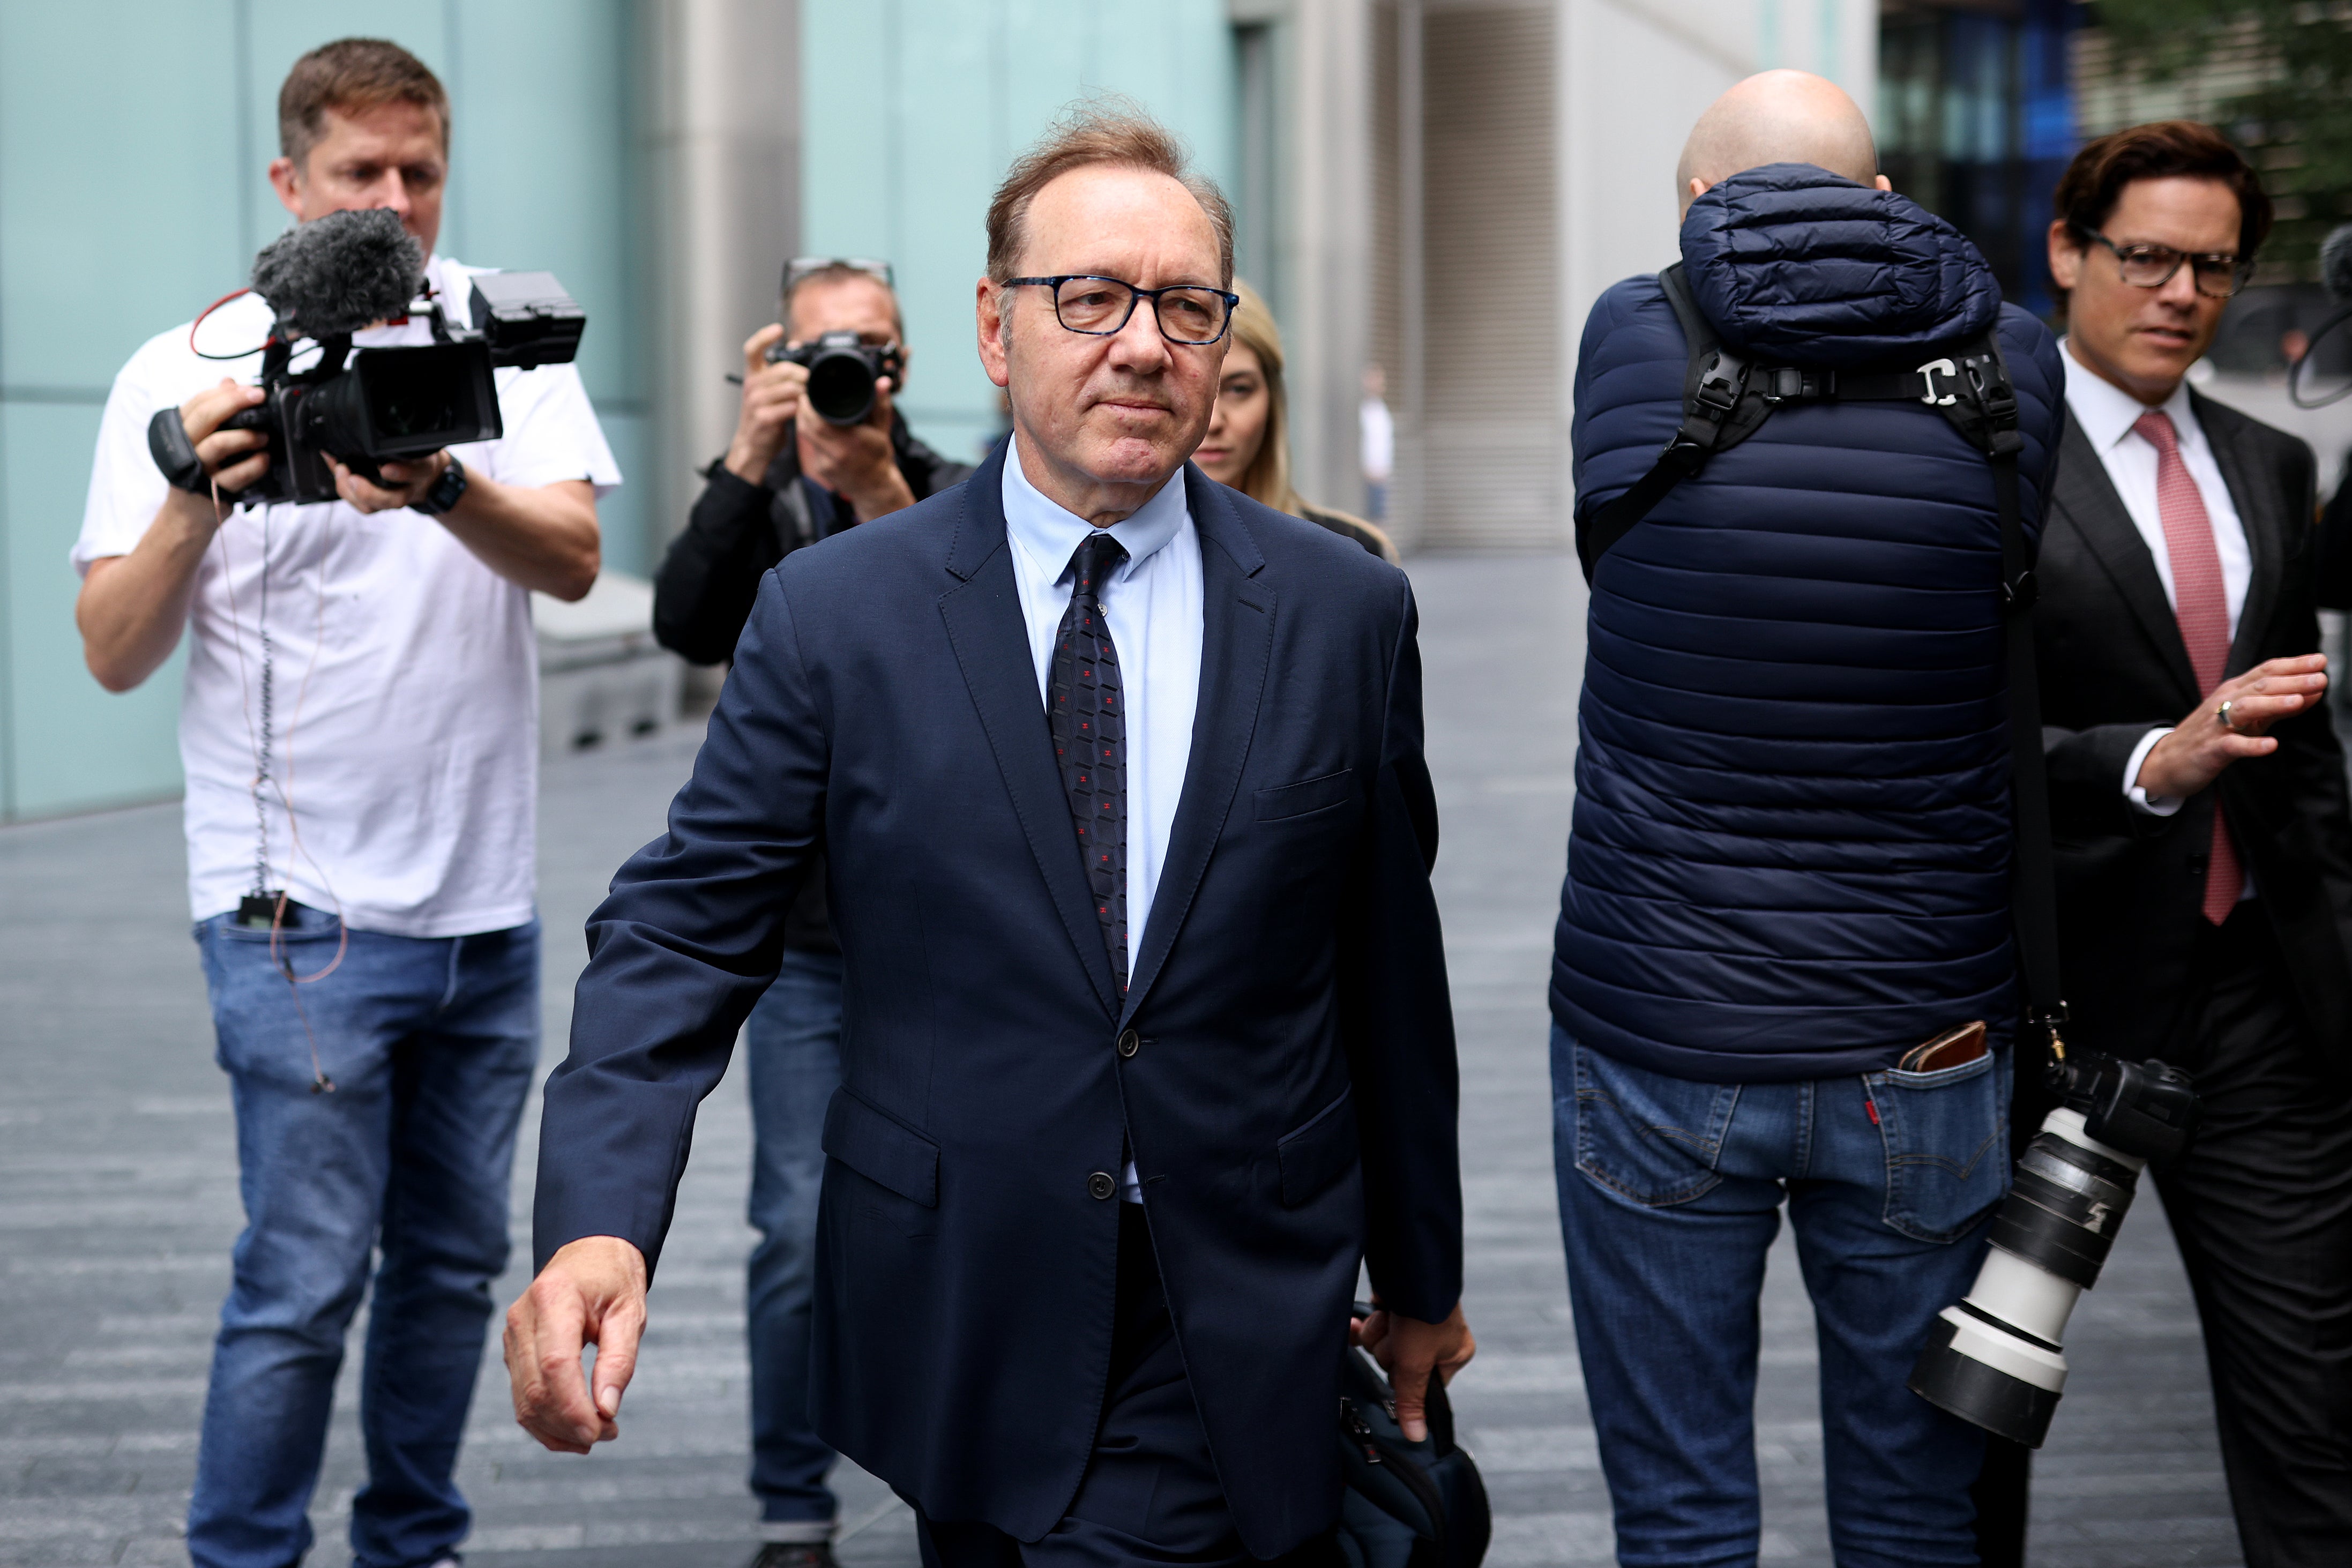 Hollywood actor Kevin Spacey arrives at Southwark Crown Court on Friday